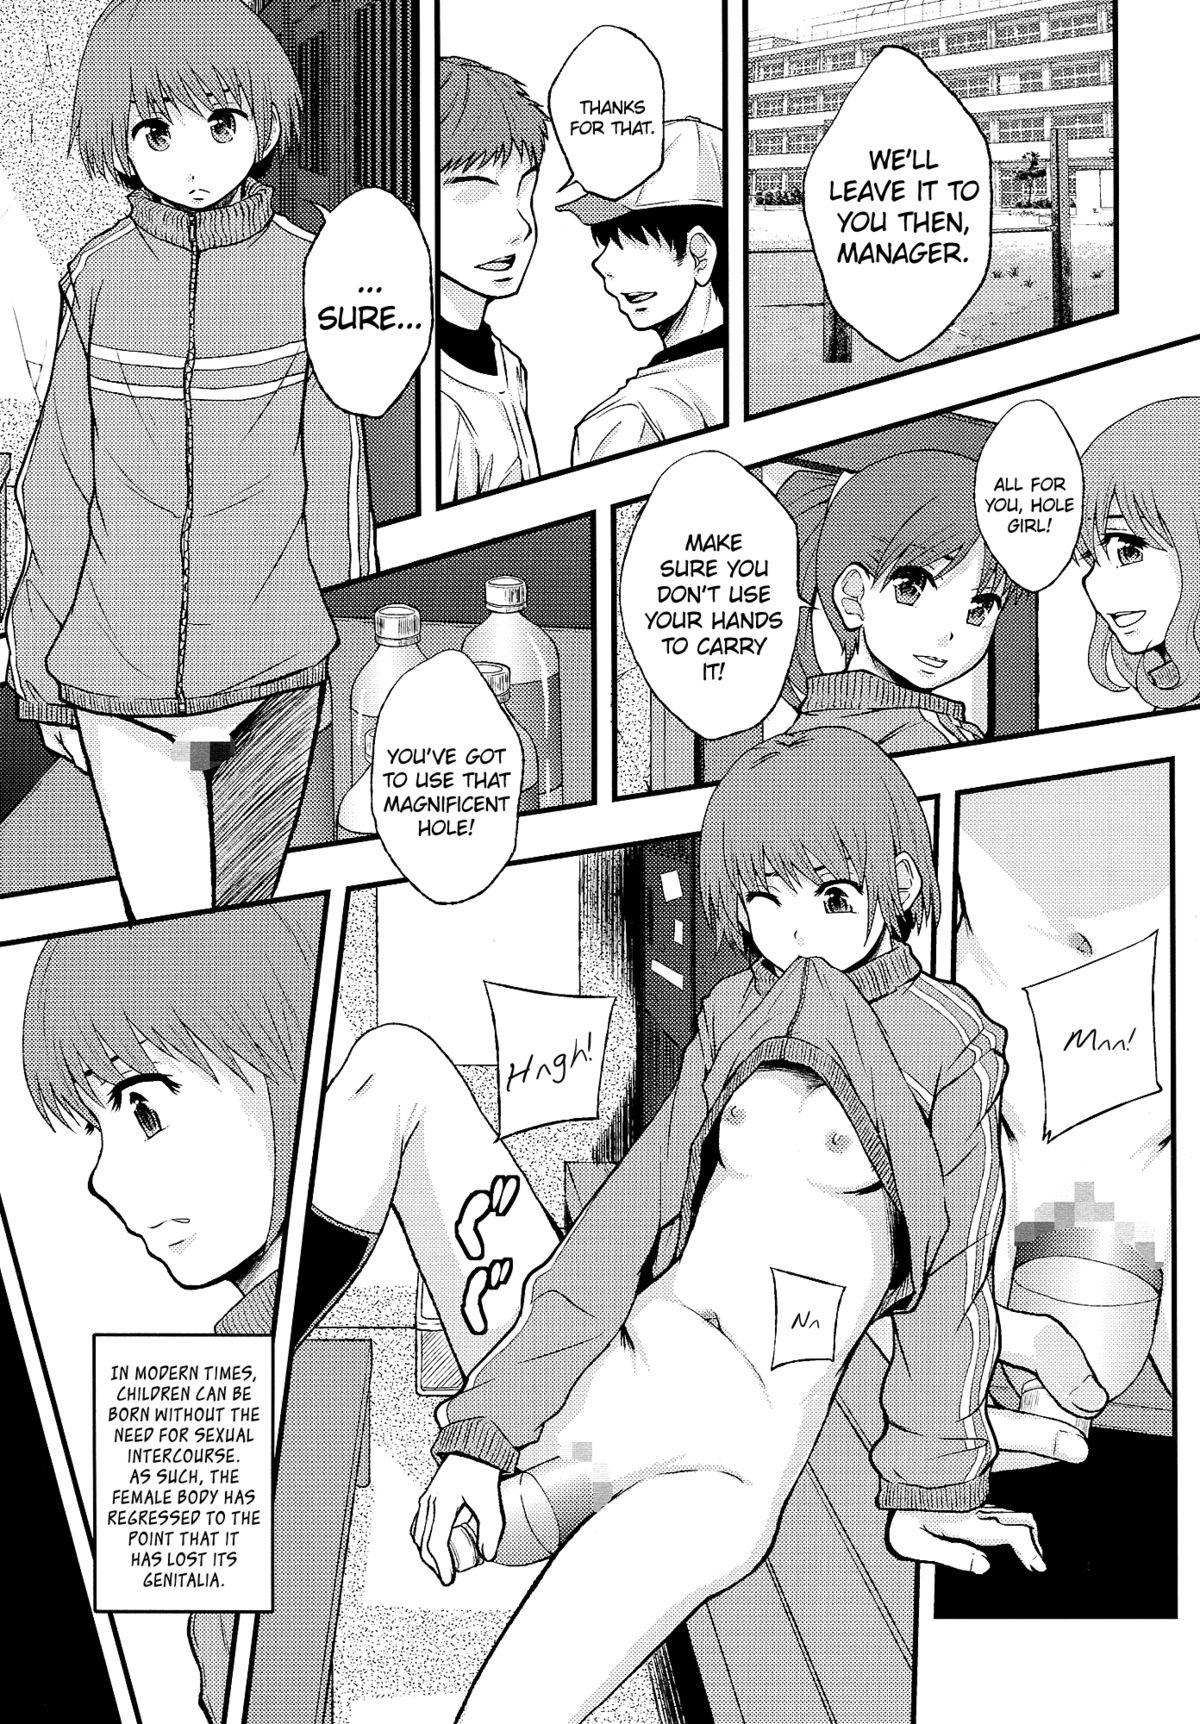 Teenage HOLE IN LOVE Picked Up - Page 2